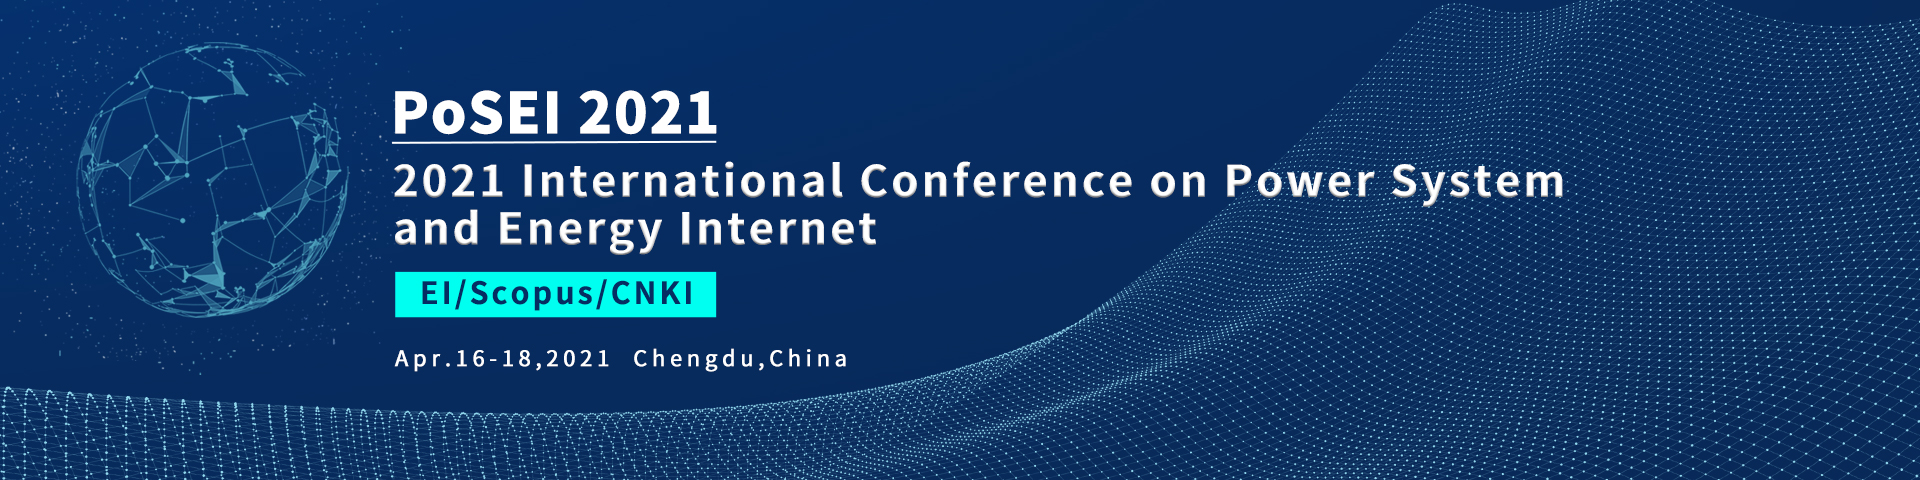 2021 International Conference on Power System and Energy Internet  (PoSEI2021), Chengdu, Sichuan, China